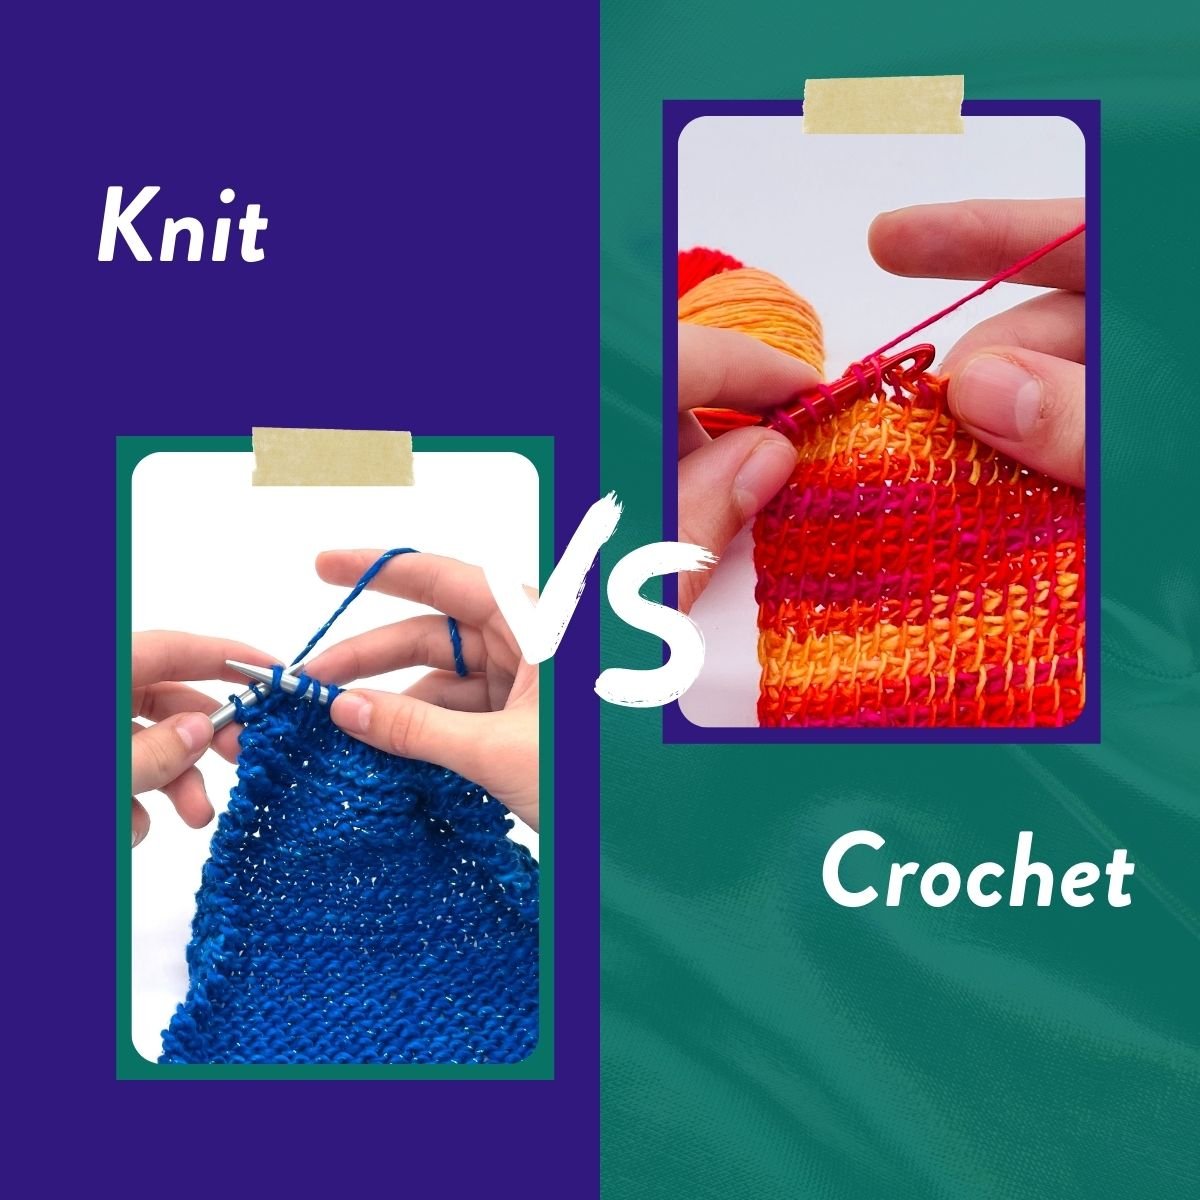 How to Choose the Best Yarn for Your Knitting Project - 2024